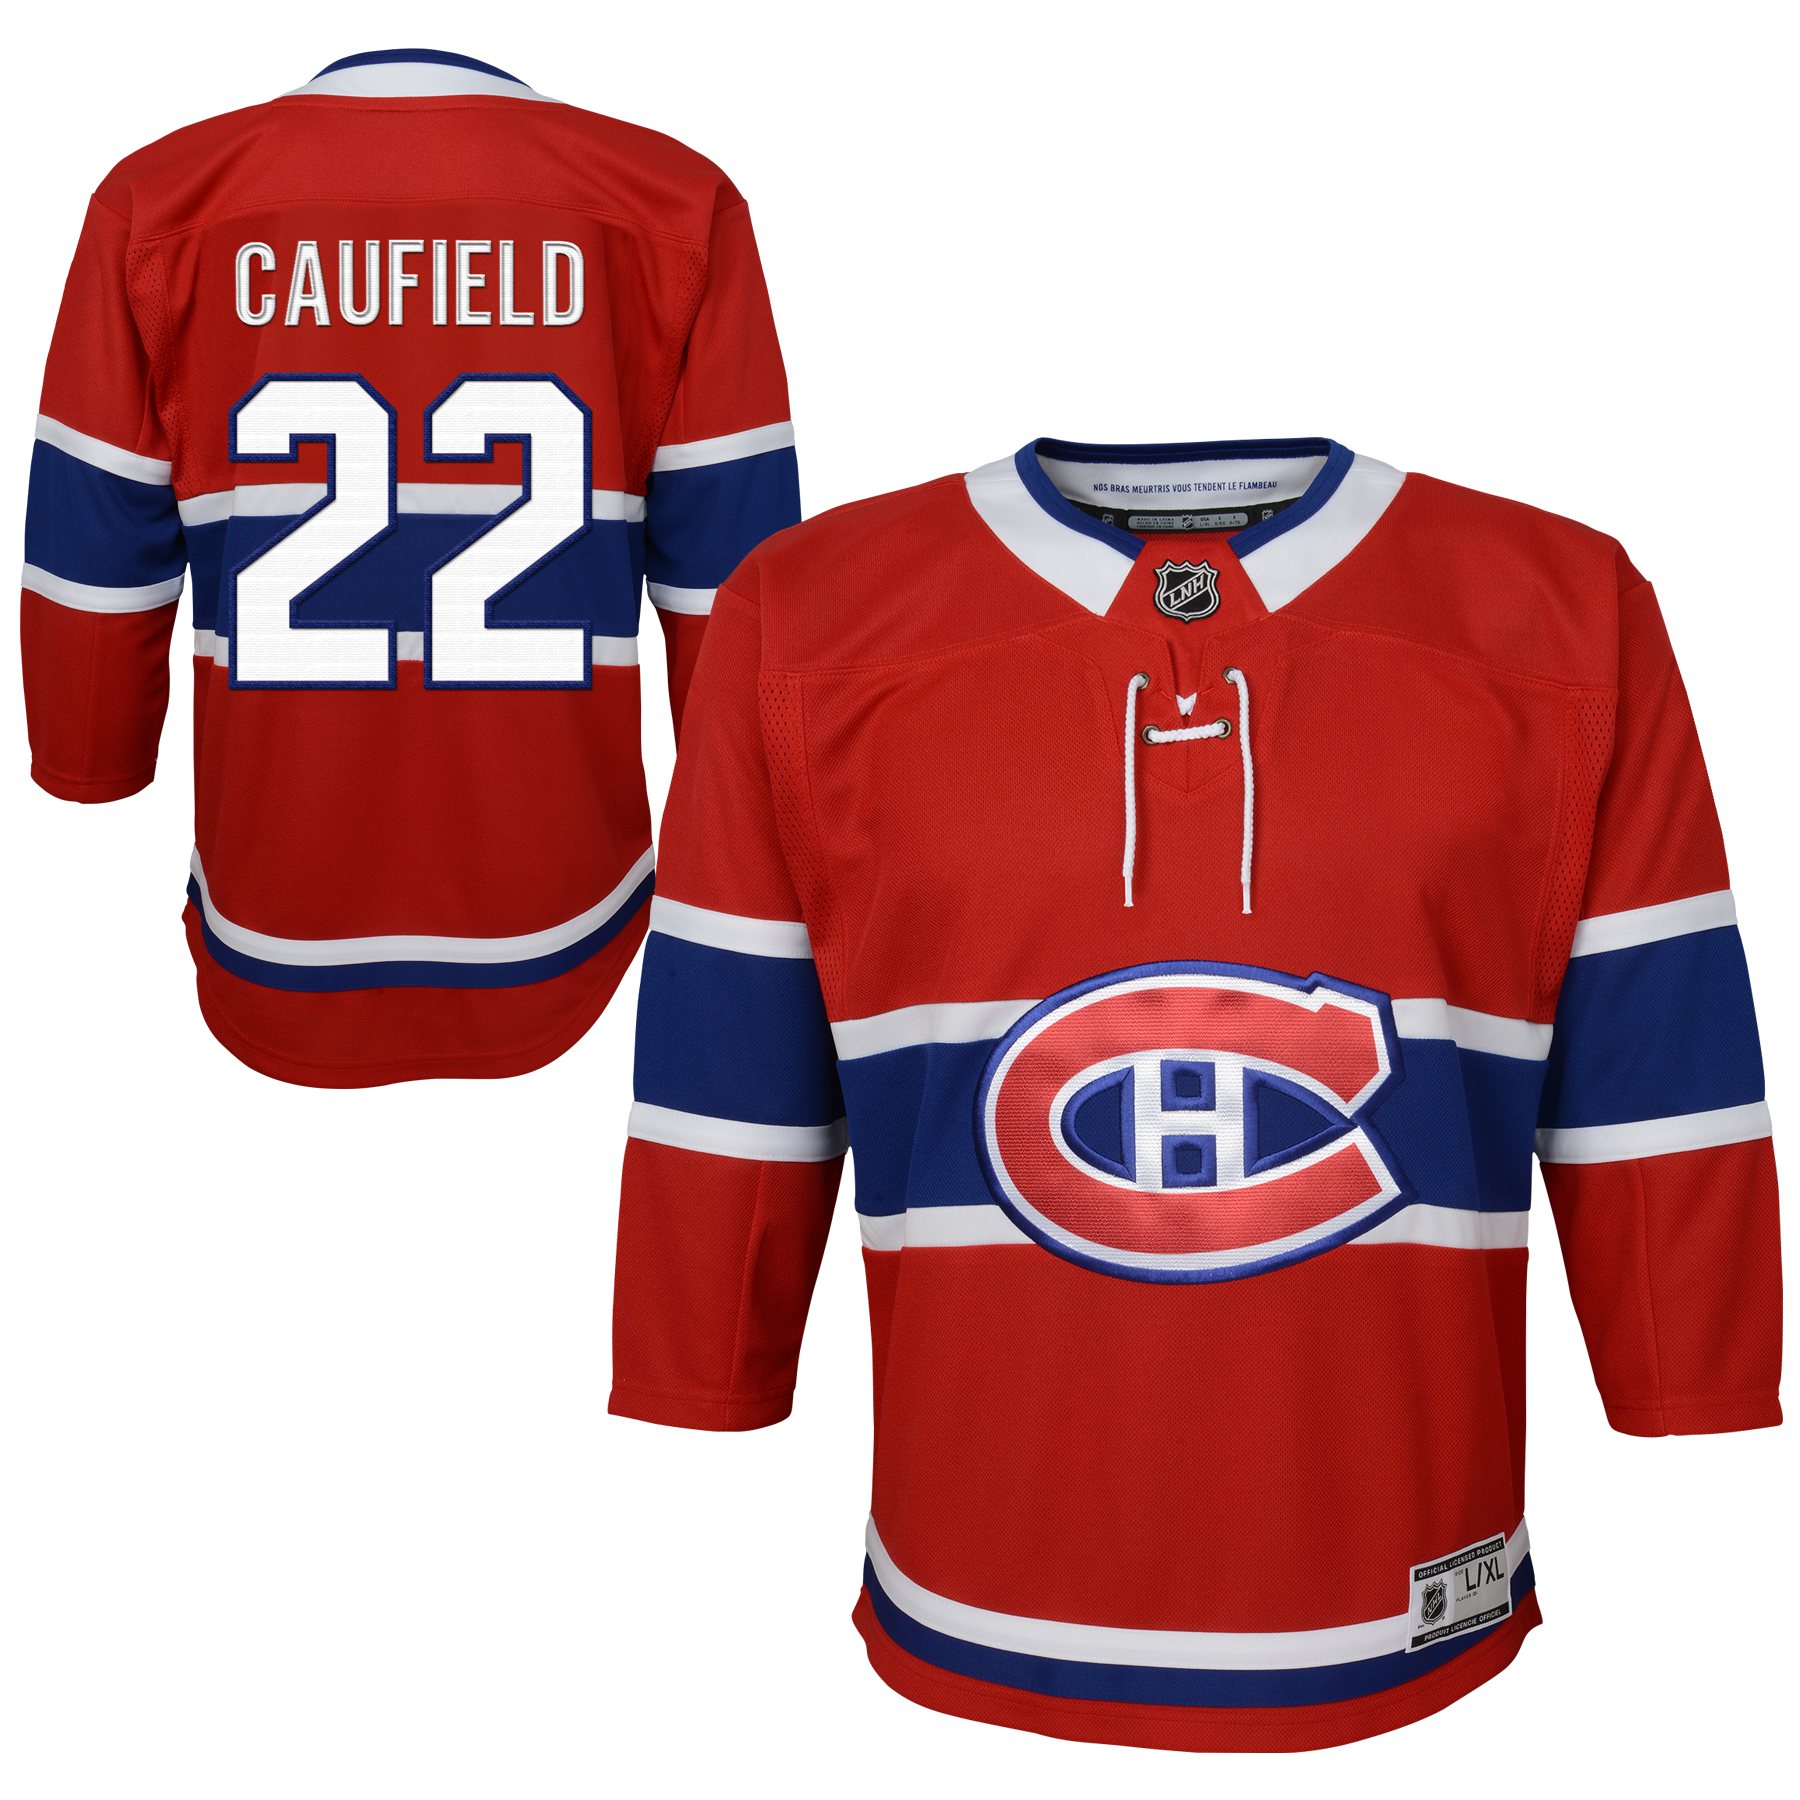 Youth NHL Montreal Canadiens #22 Cole Caufield Home Red